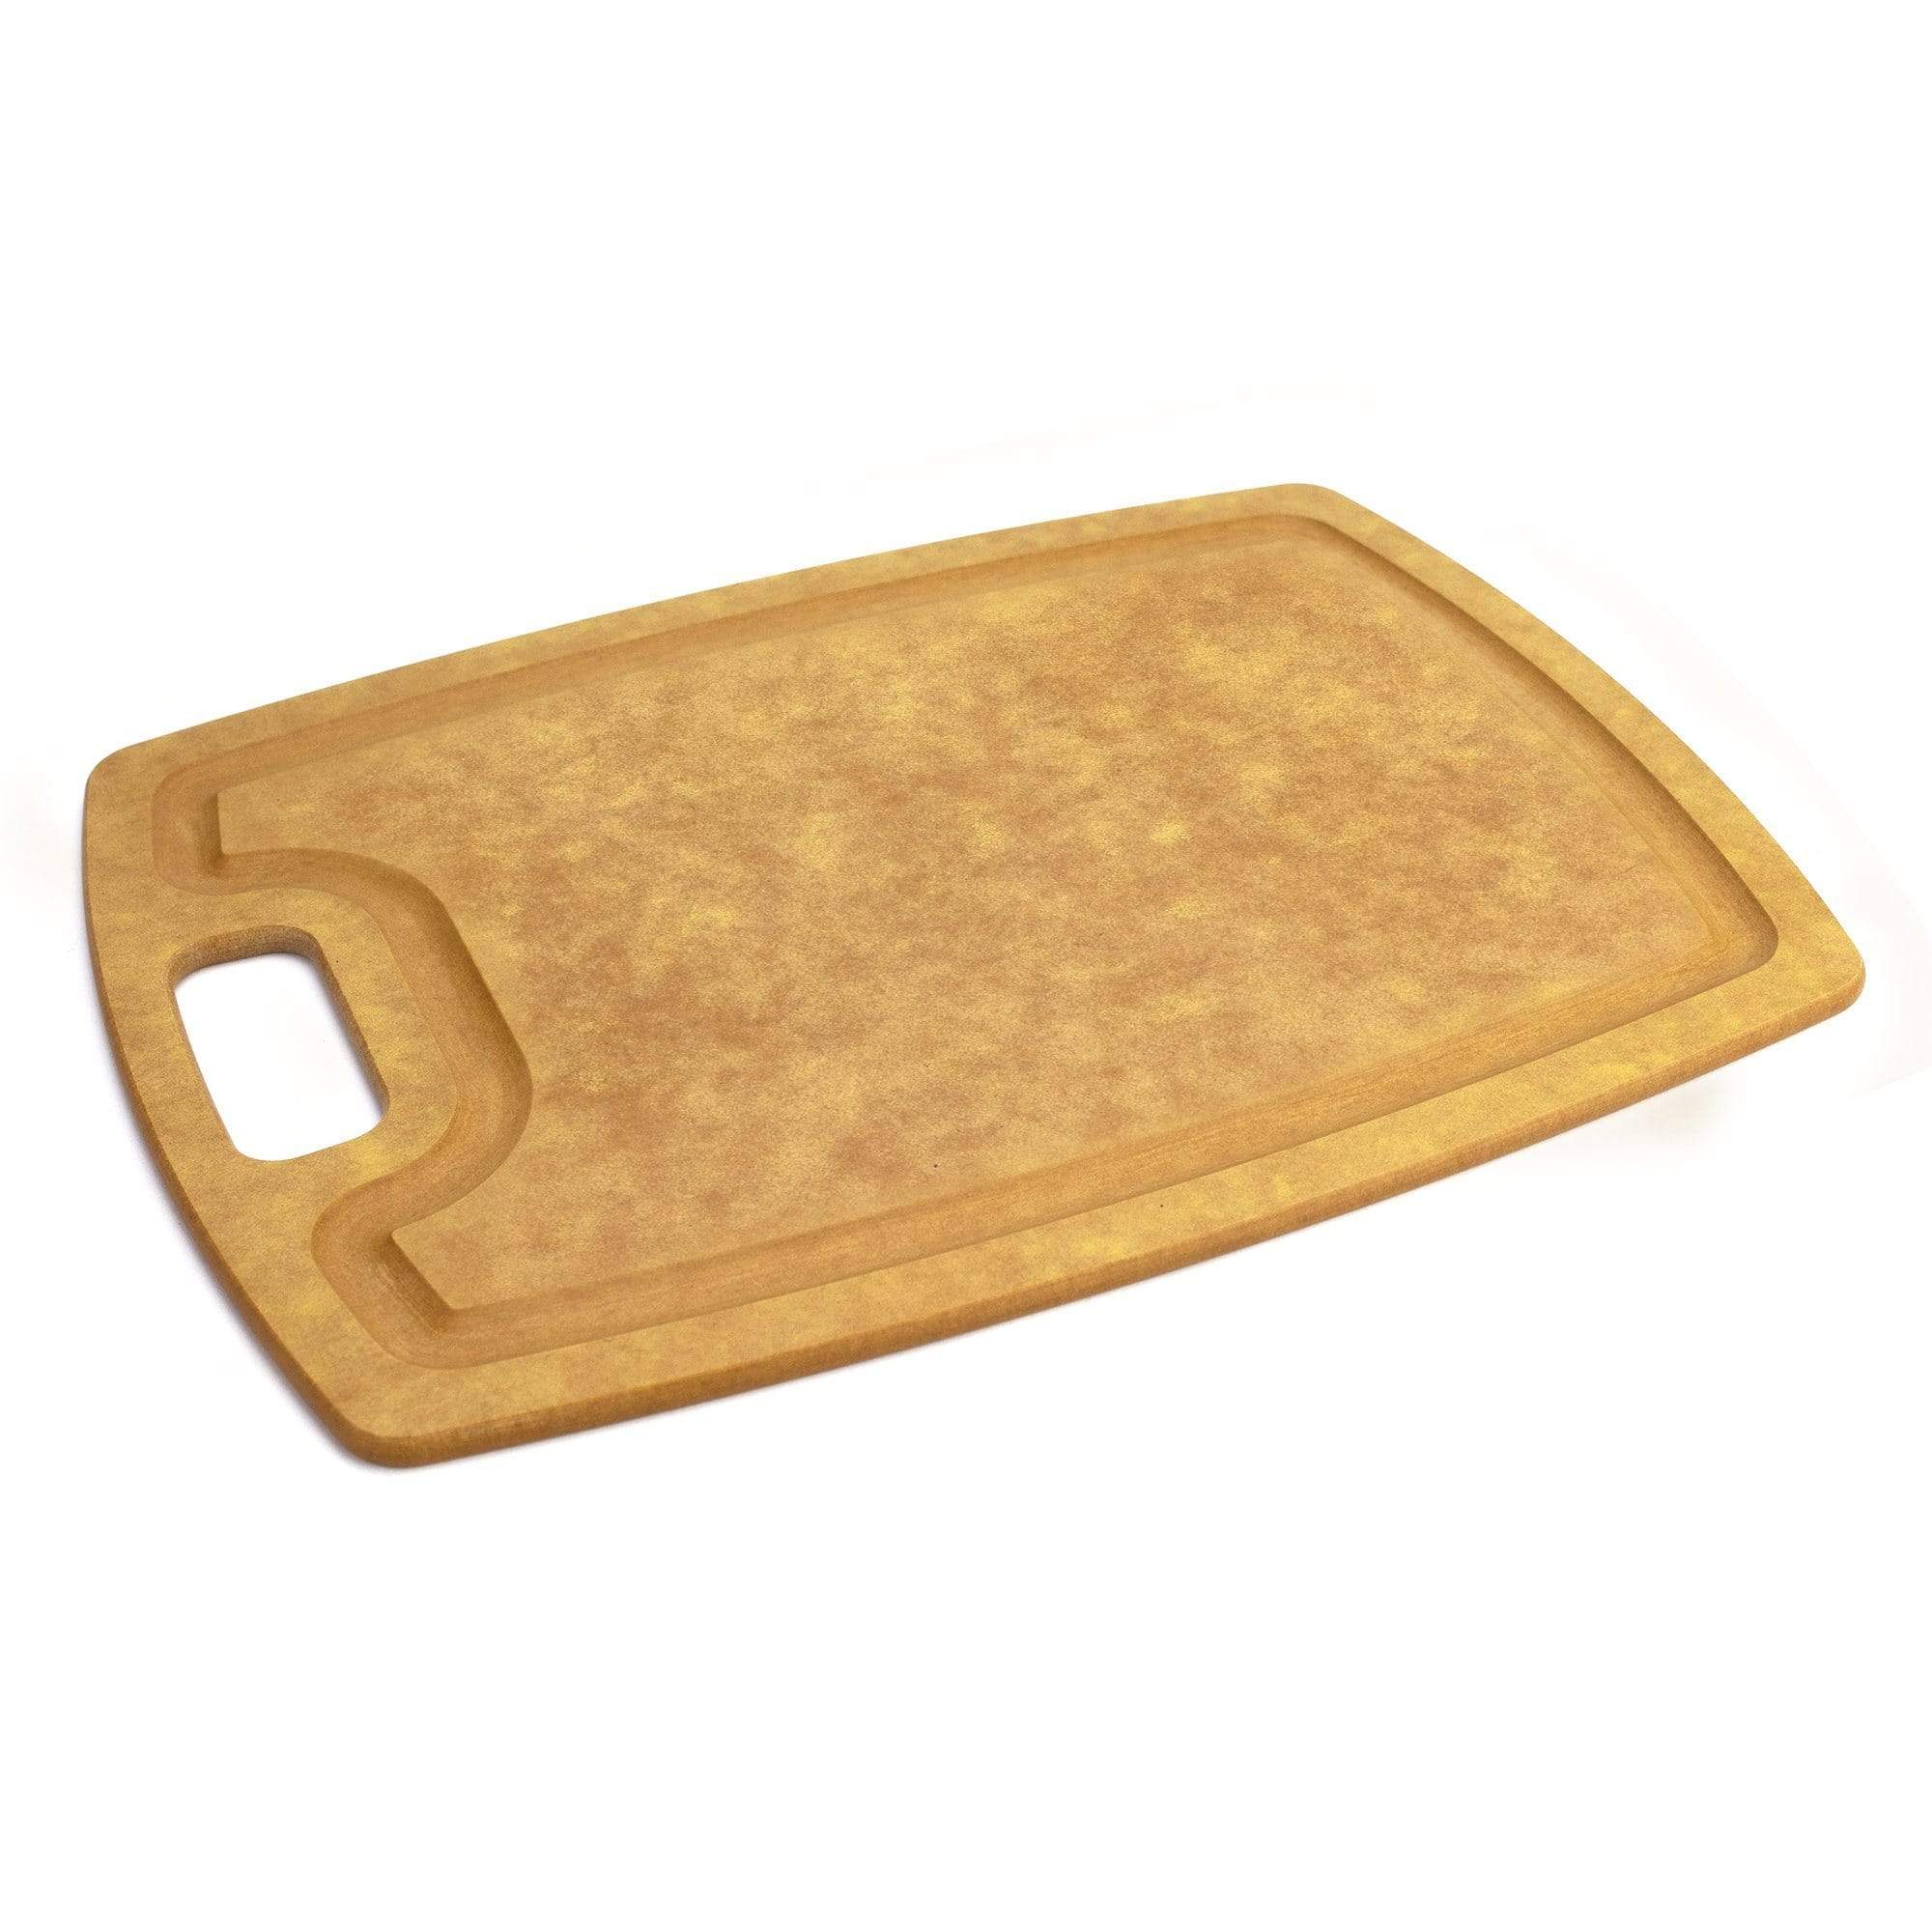 Totally Bamboo Vellum™ Wood Paper Composite Cutting Board with Juice Groove, 11-3/4" x 8-1/2" | Dishwasher Safe